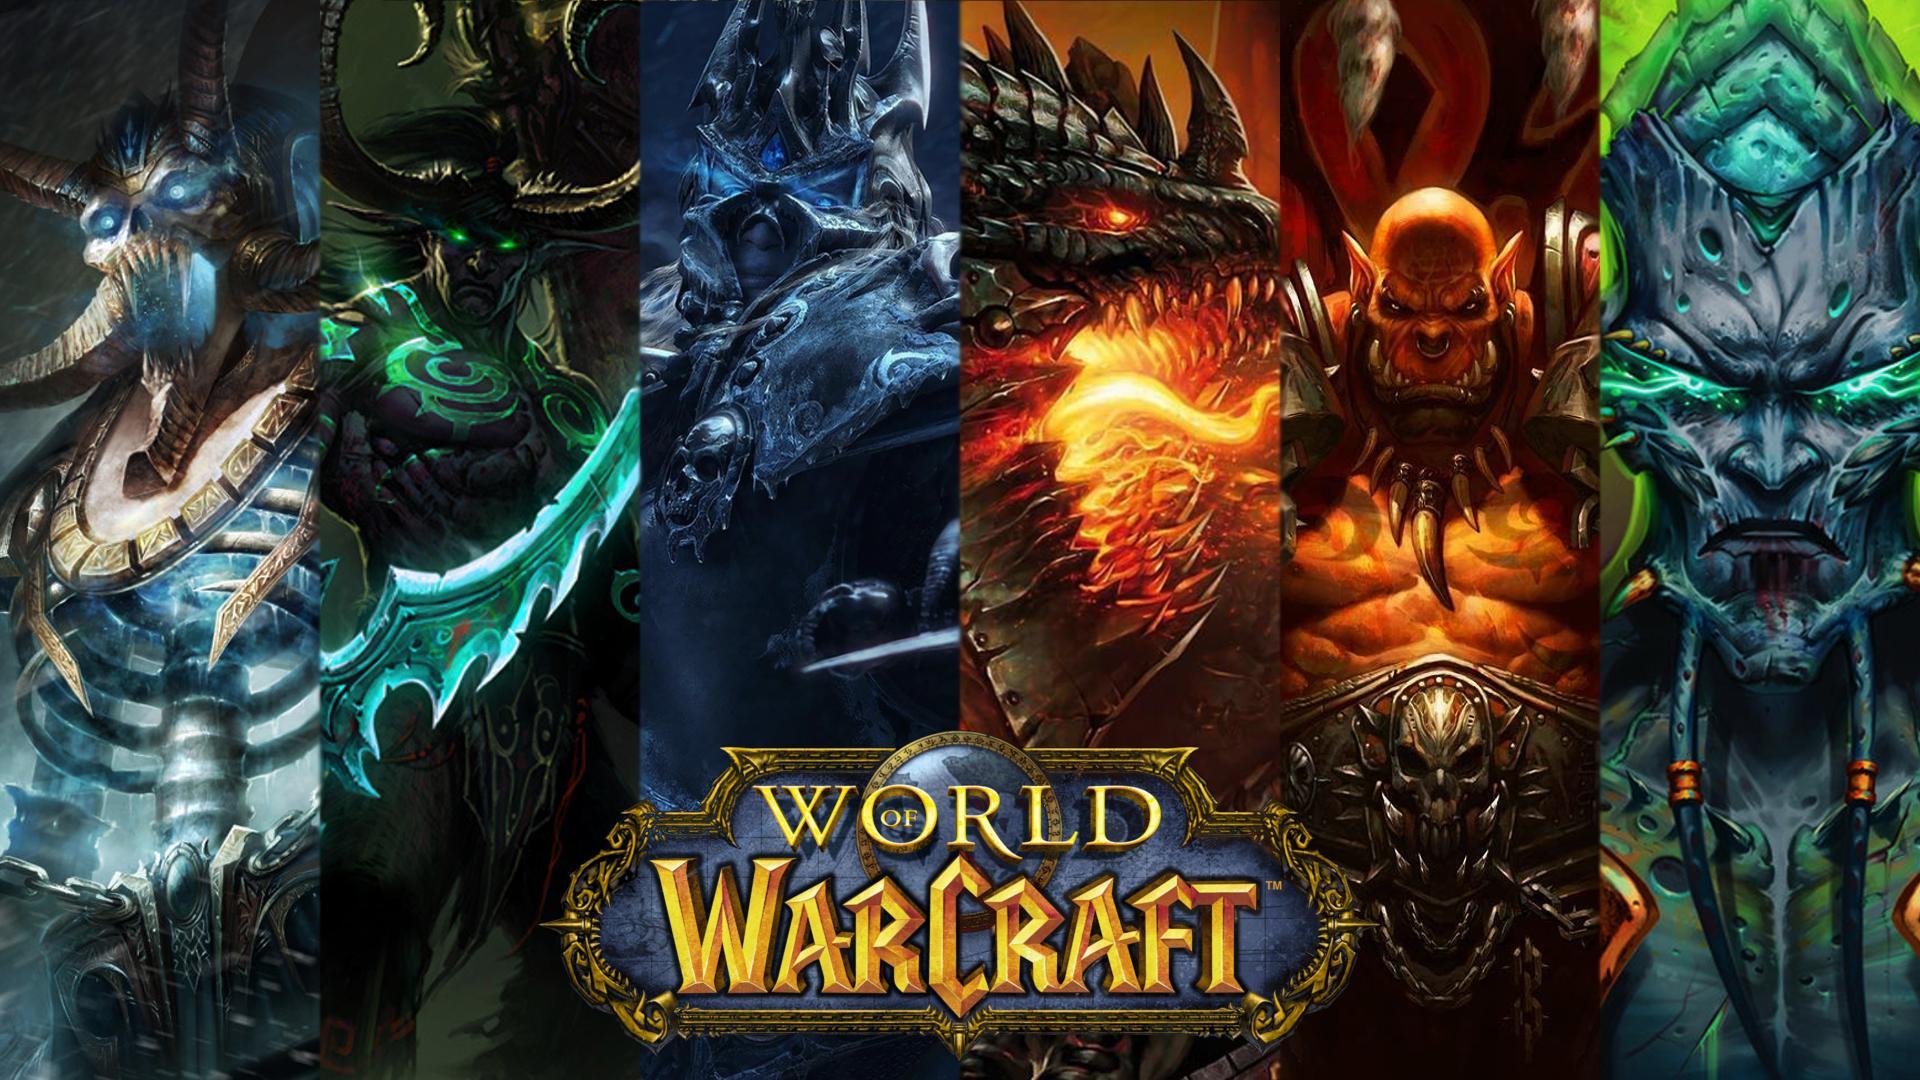 Someone requested an updated WoW Wallpaper, here's what I came up